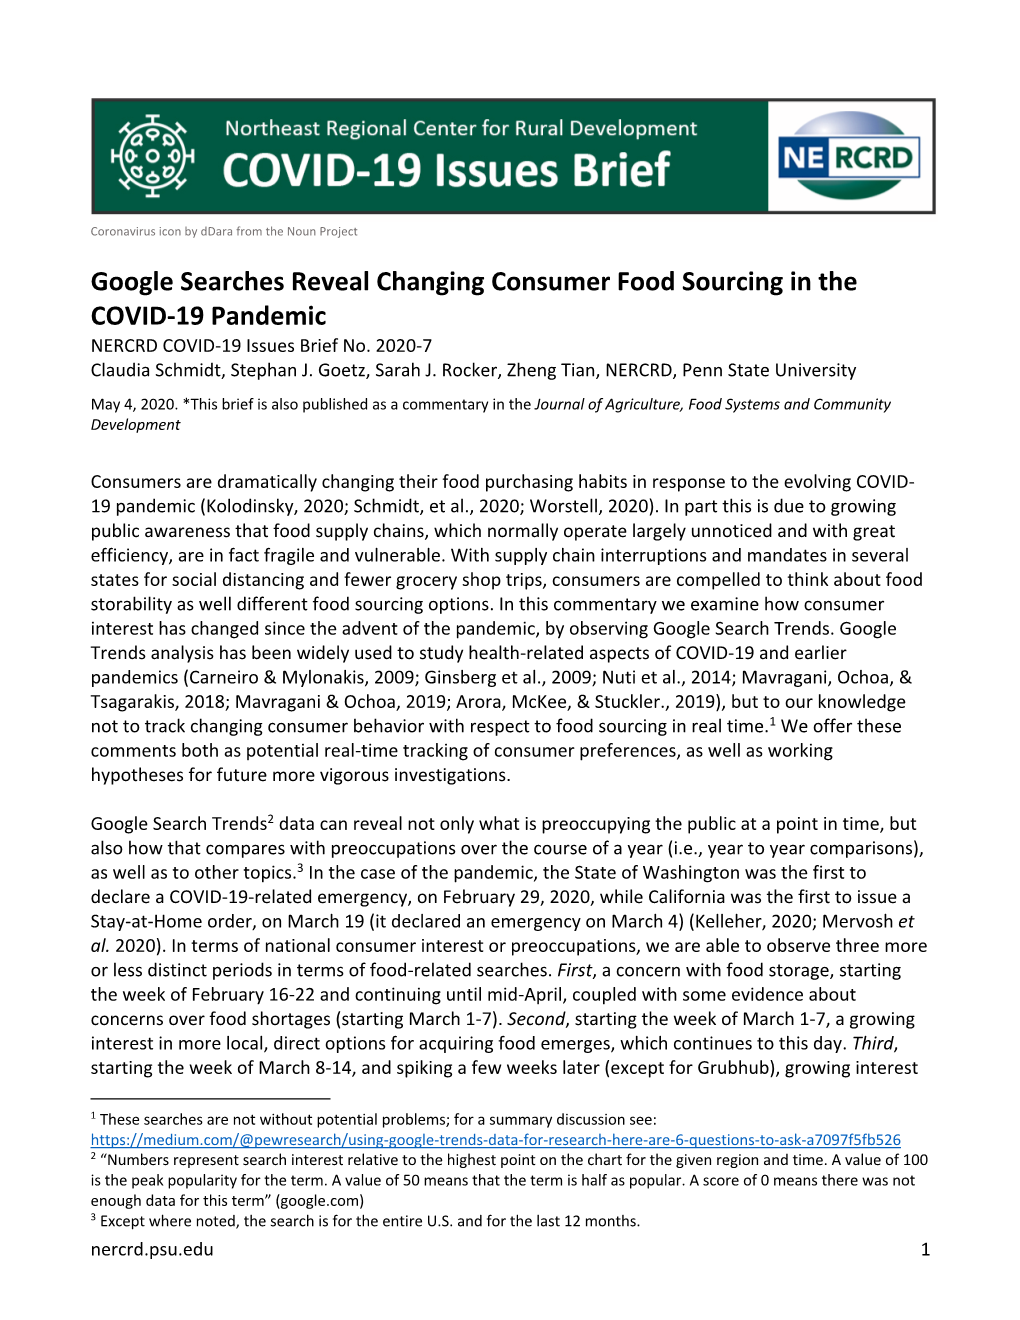 Google Searches Reveal Changing Consumer Food Sourcing in the COVID-19 Pandemic NERCRD COVID-19 Issues Brief No